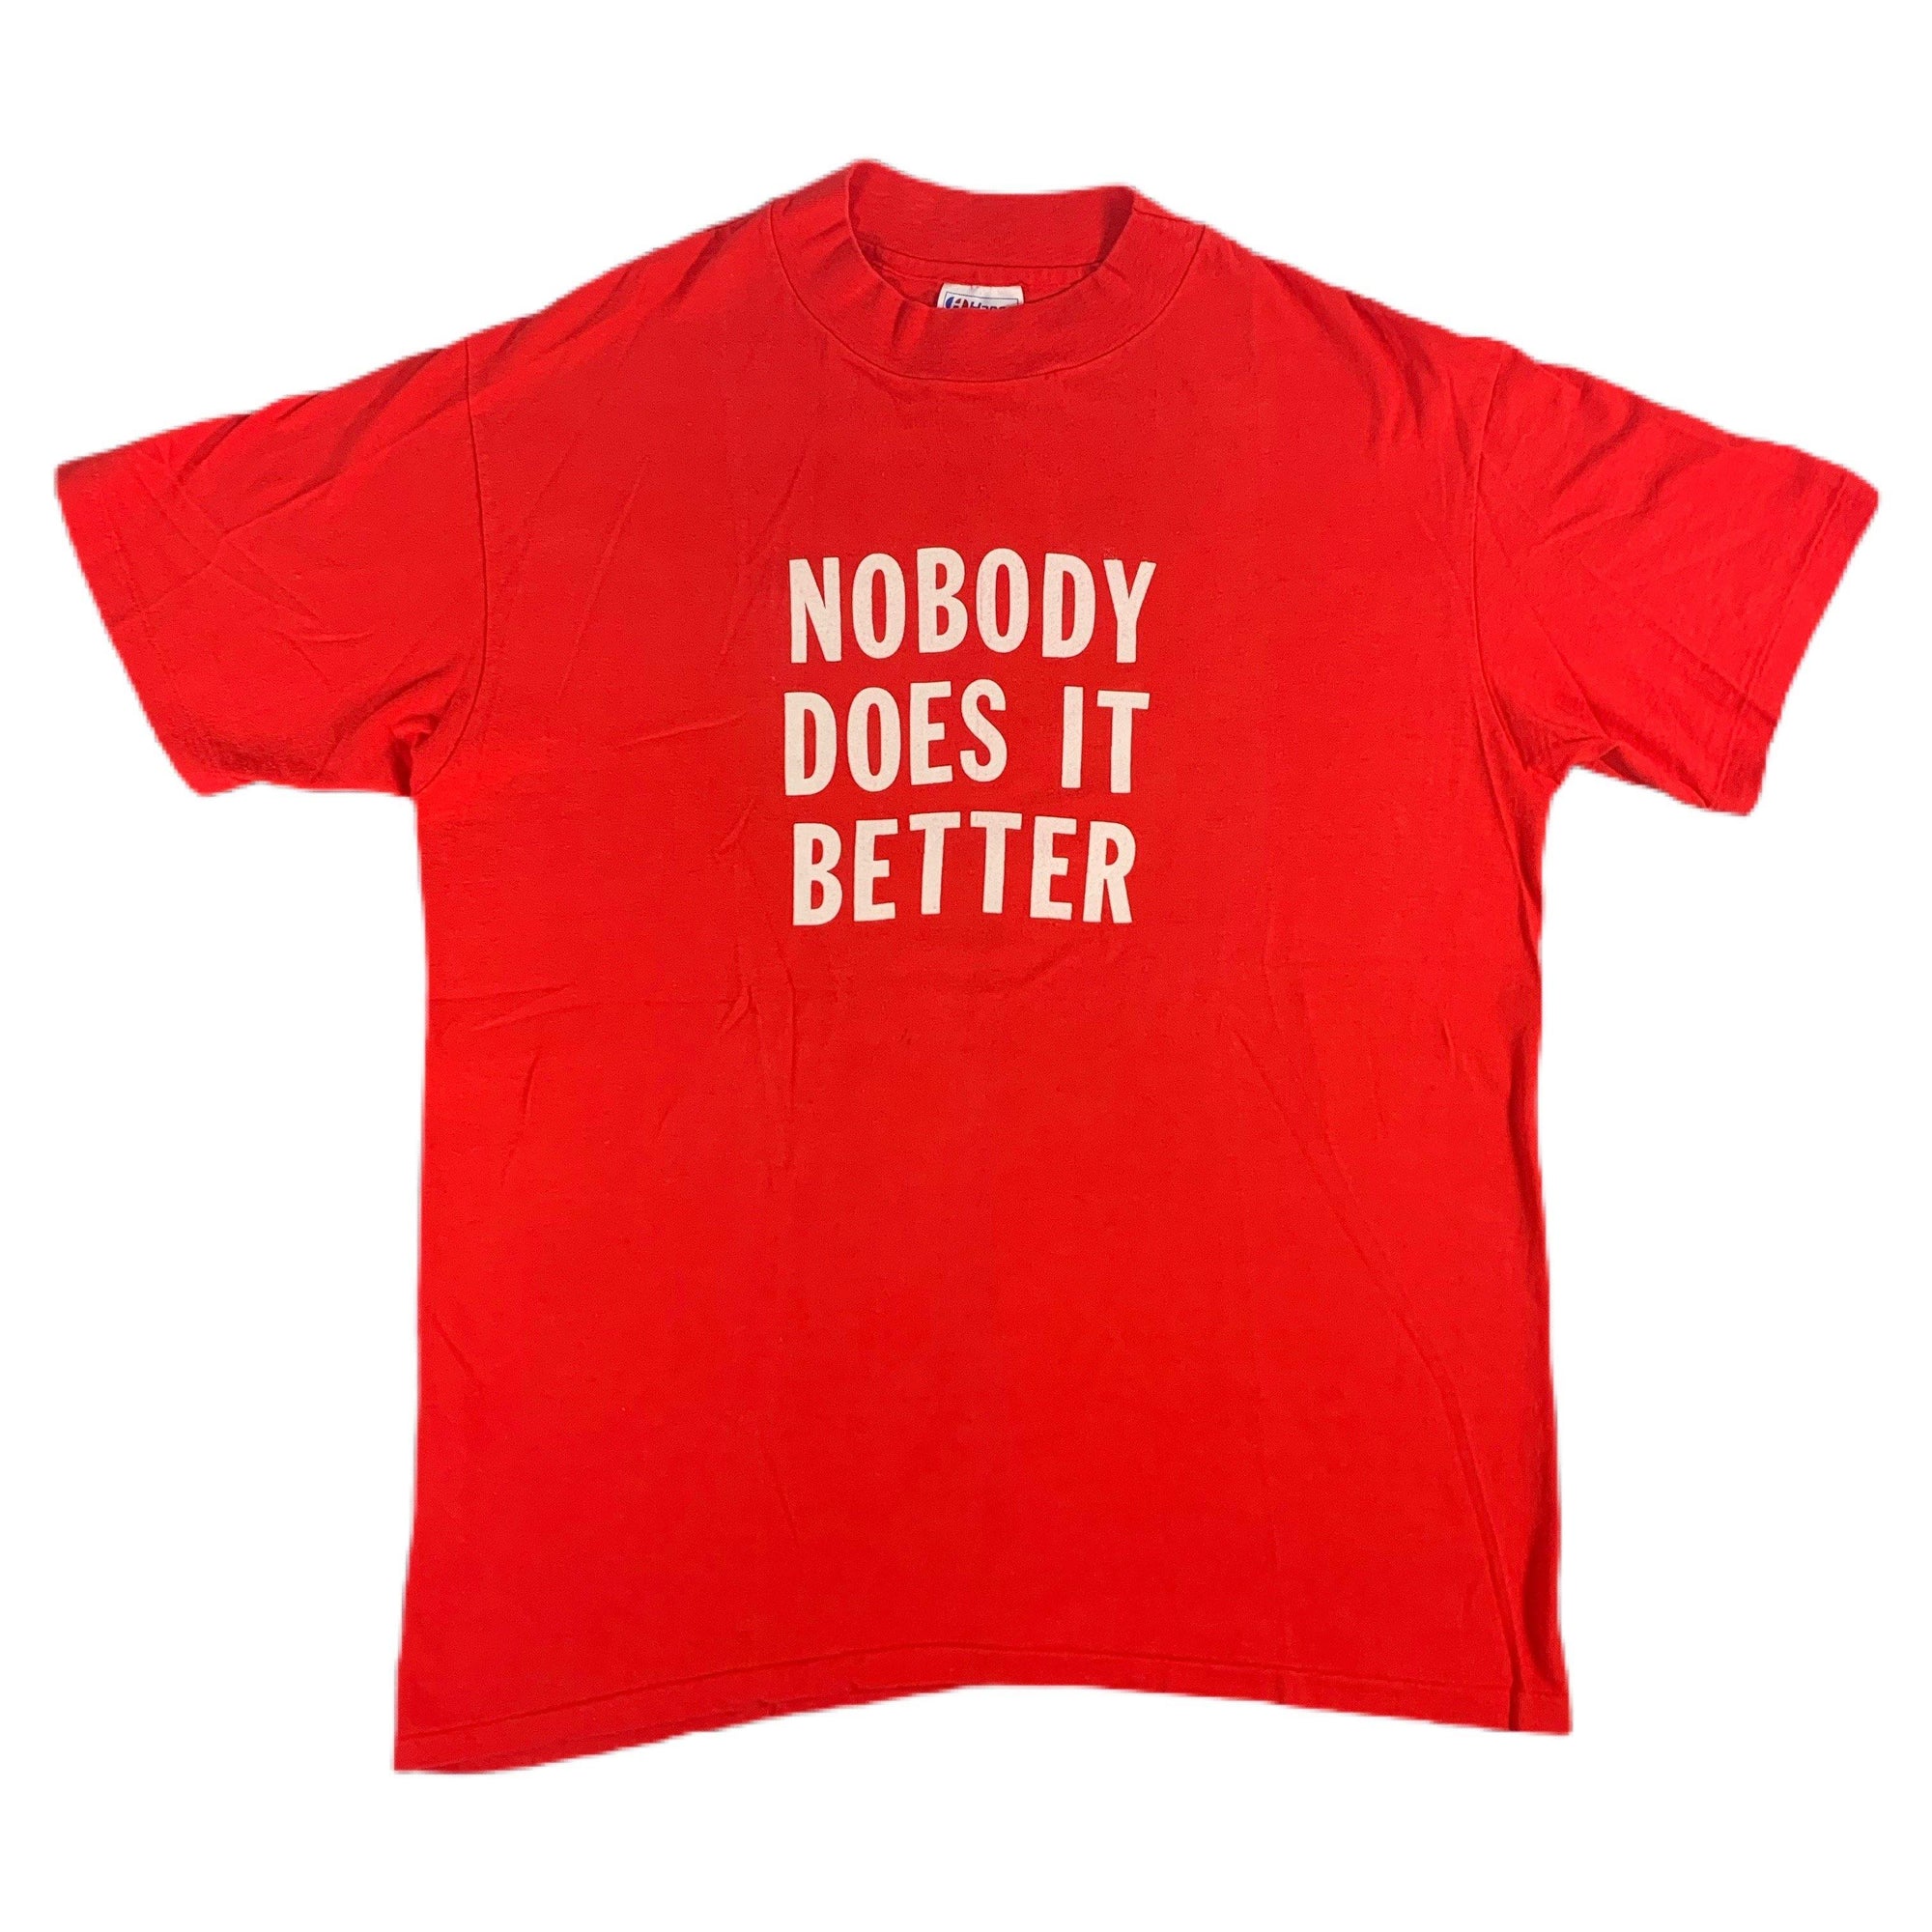 Vintage Hanes Beefy-T "Nobody Does It Better" T-Shirt - jointcustodydc